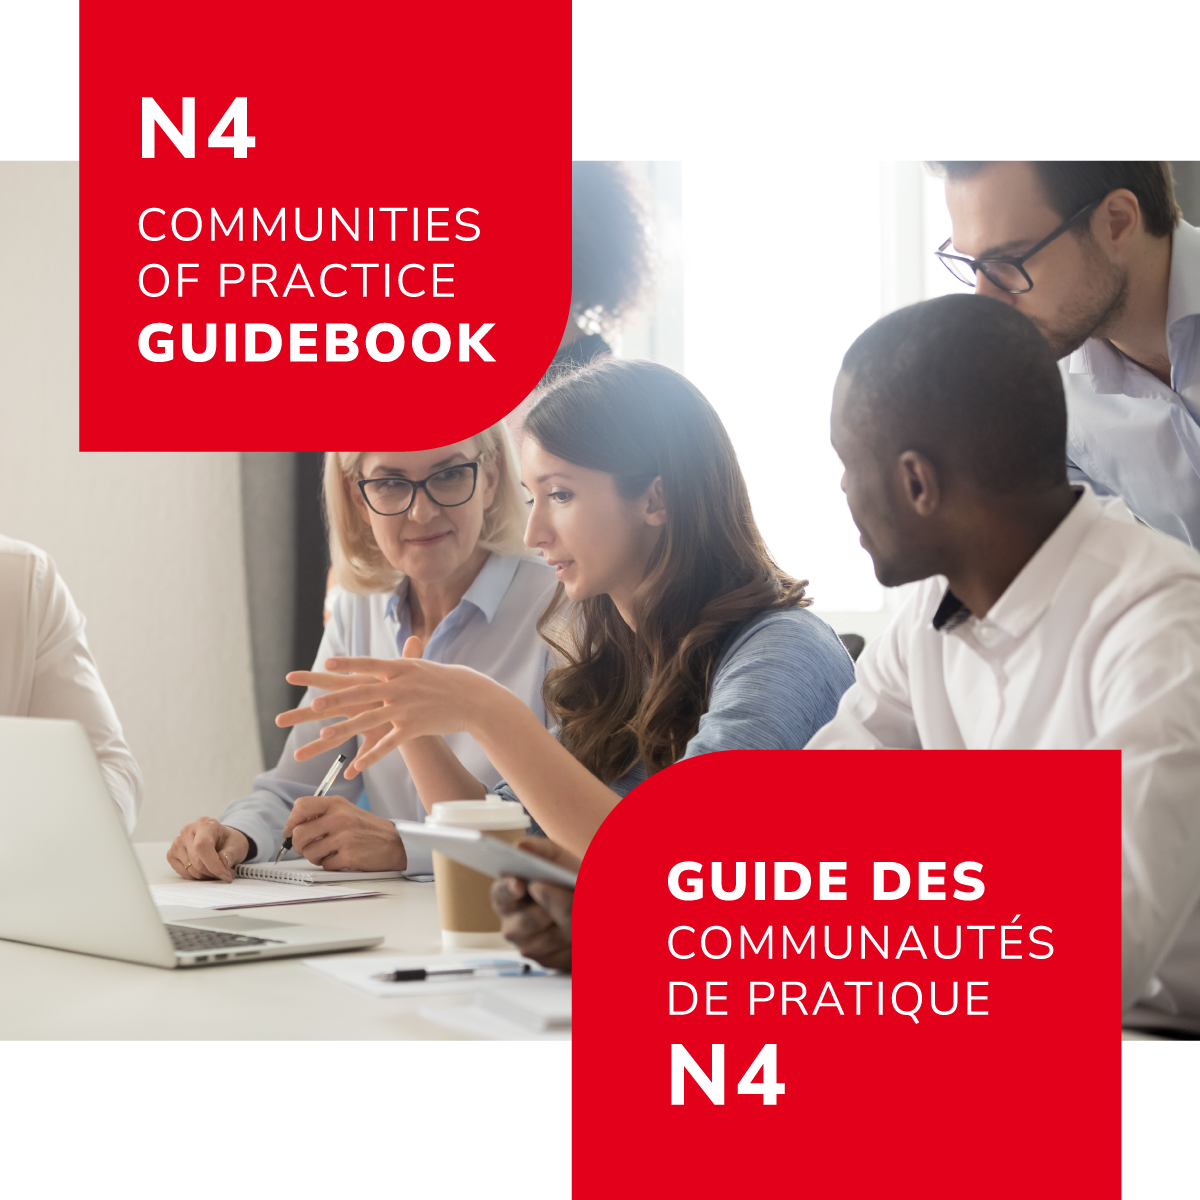 Image that reads "N4 Communities of Practice Guidebook" with people gathered around laptop talking